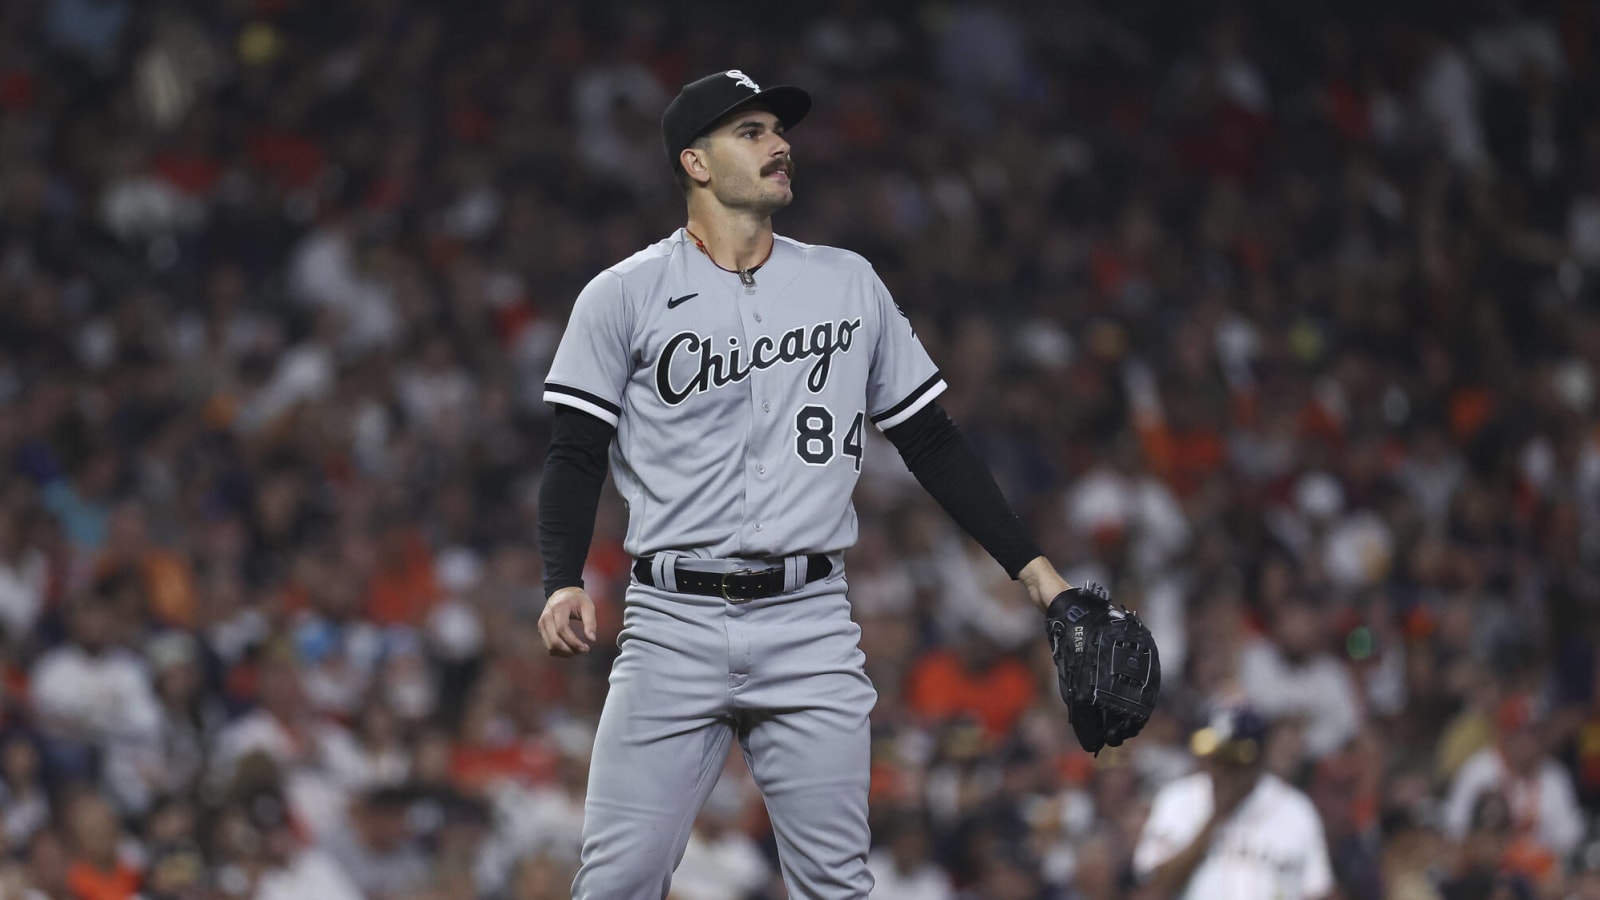 Dylan Cease ties White Sox record in Opening Day win